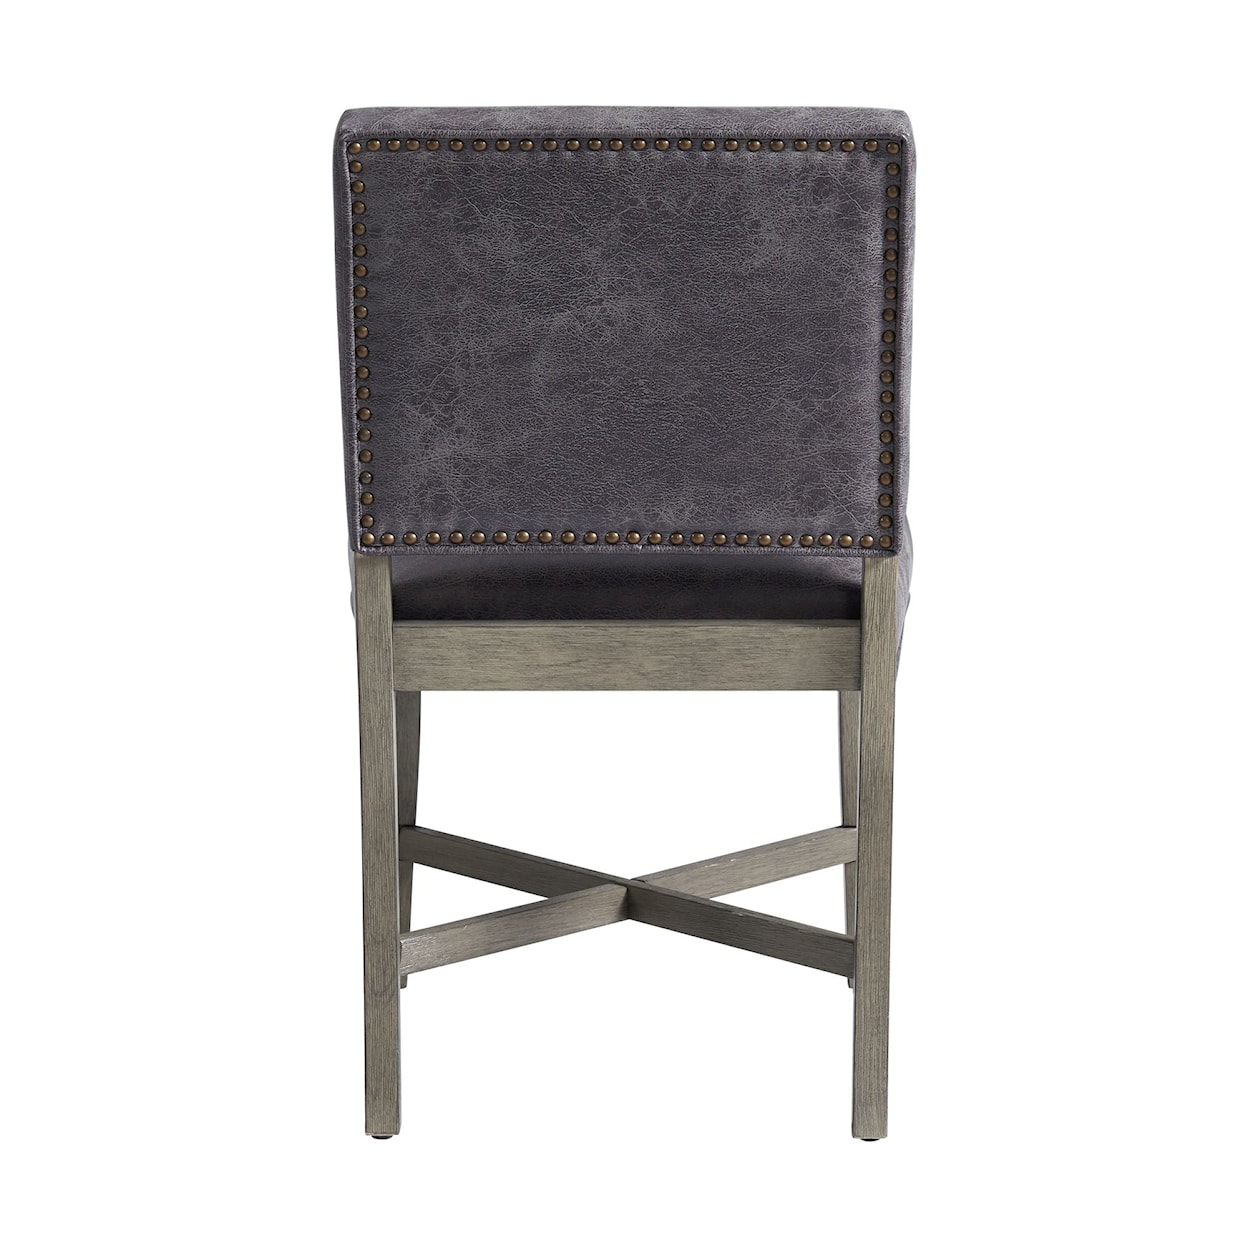 Elements Collins Set of 2 Dining Side Chairs